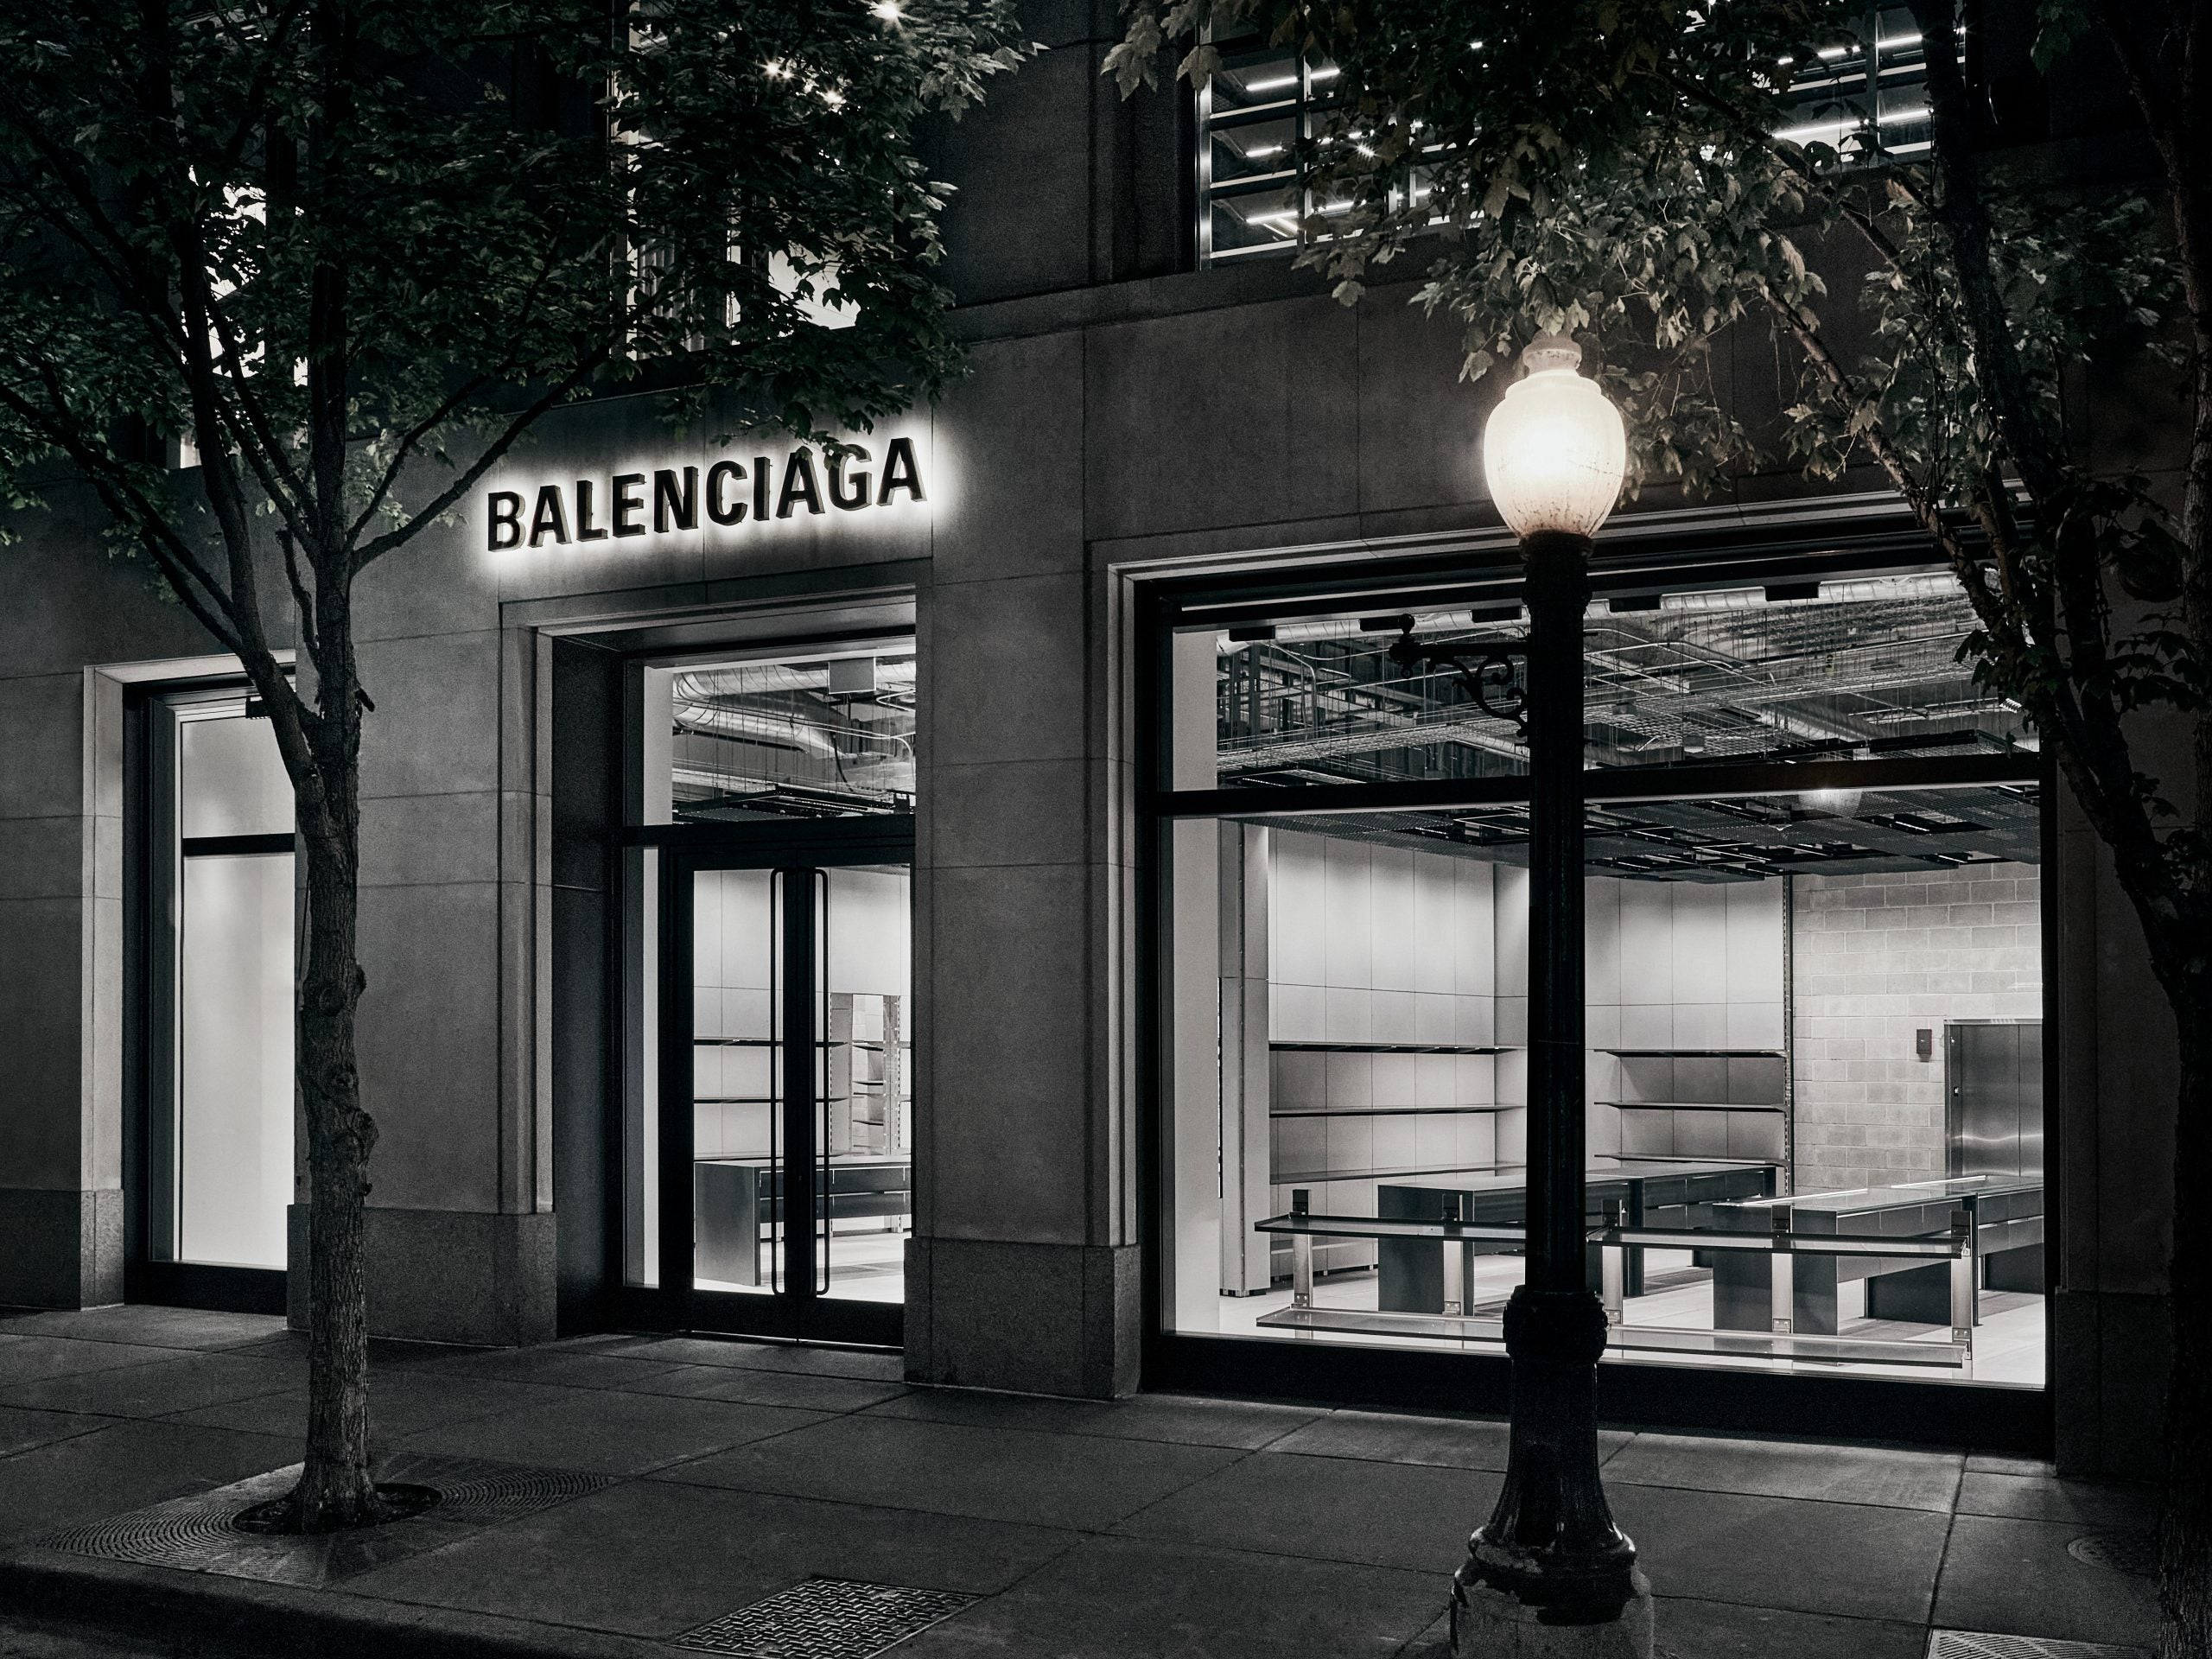 A Balenciaga Storefront Has Opened In Chicago